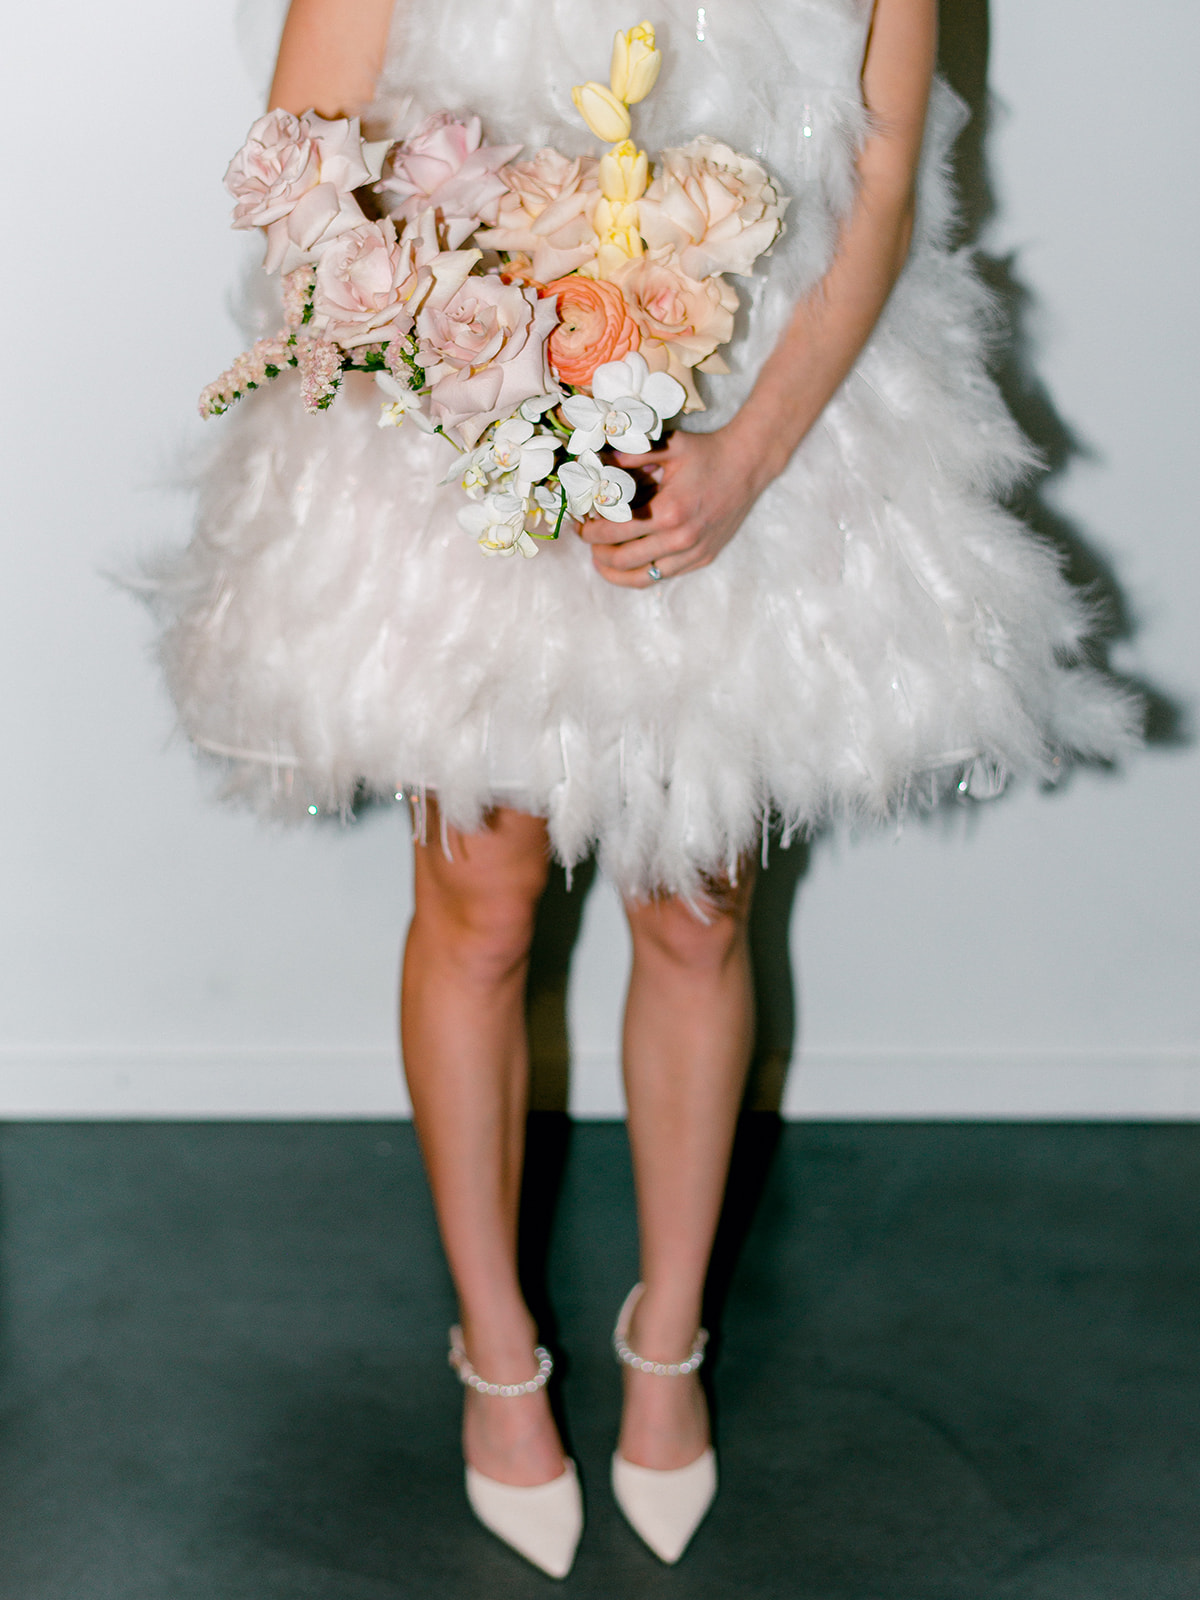 short wedding dress style, minimalistic studio venue for wedding photos highlighting the beauty of a feather bridal look, pastel yellows and pinks in bouquet with pop of orange